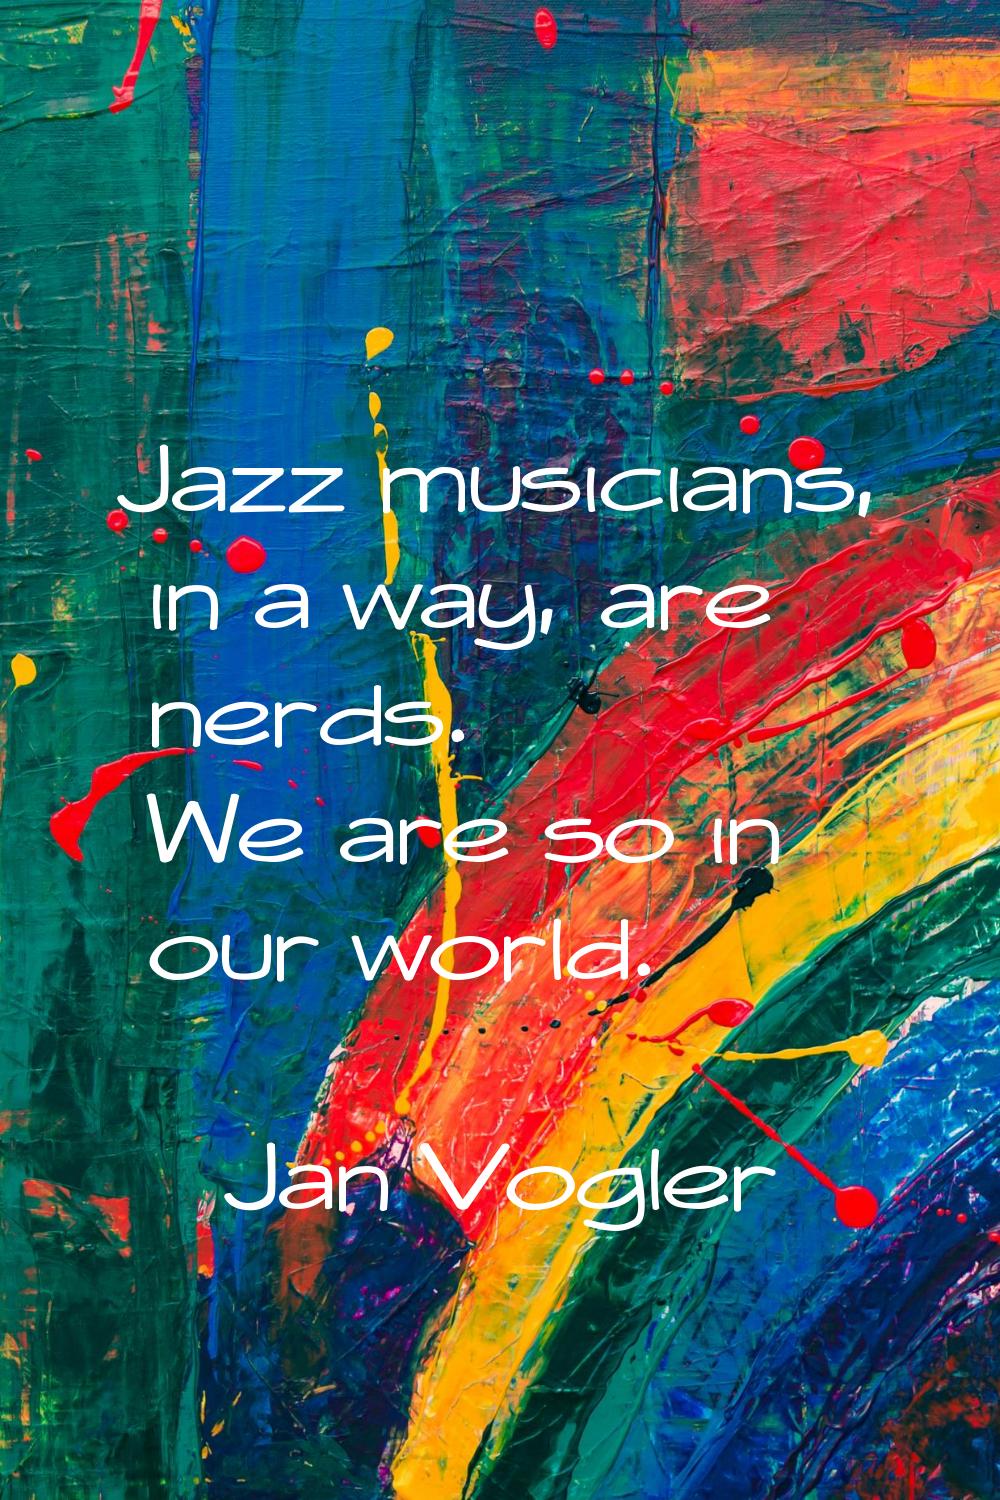 Jazz musicians, in a way, are nerds. We are so in our world.